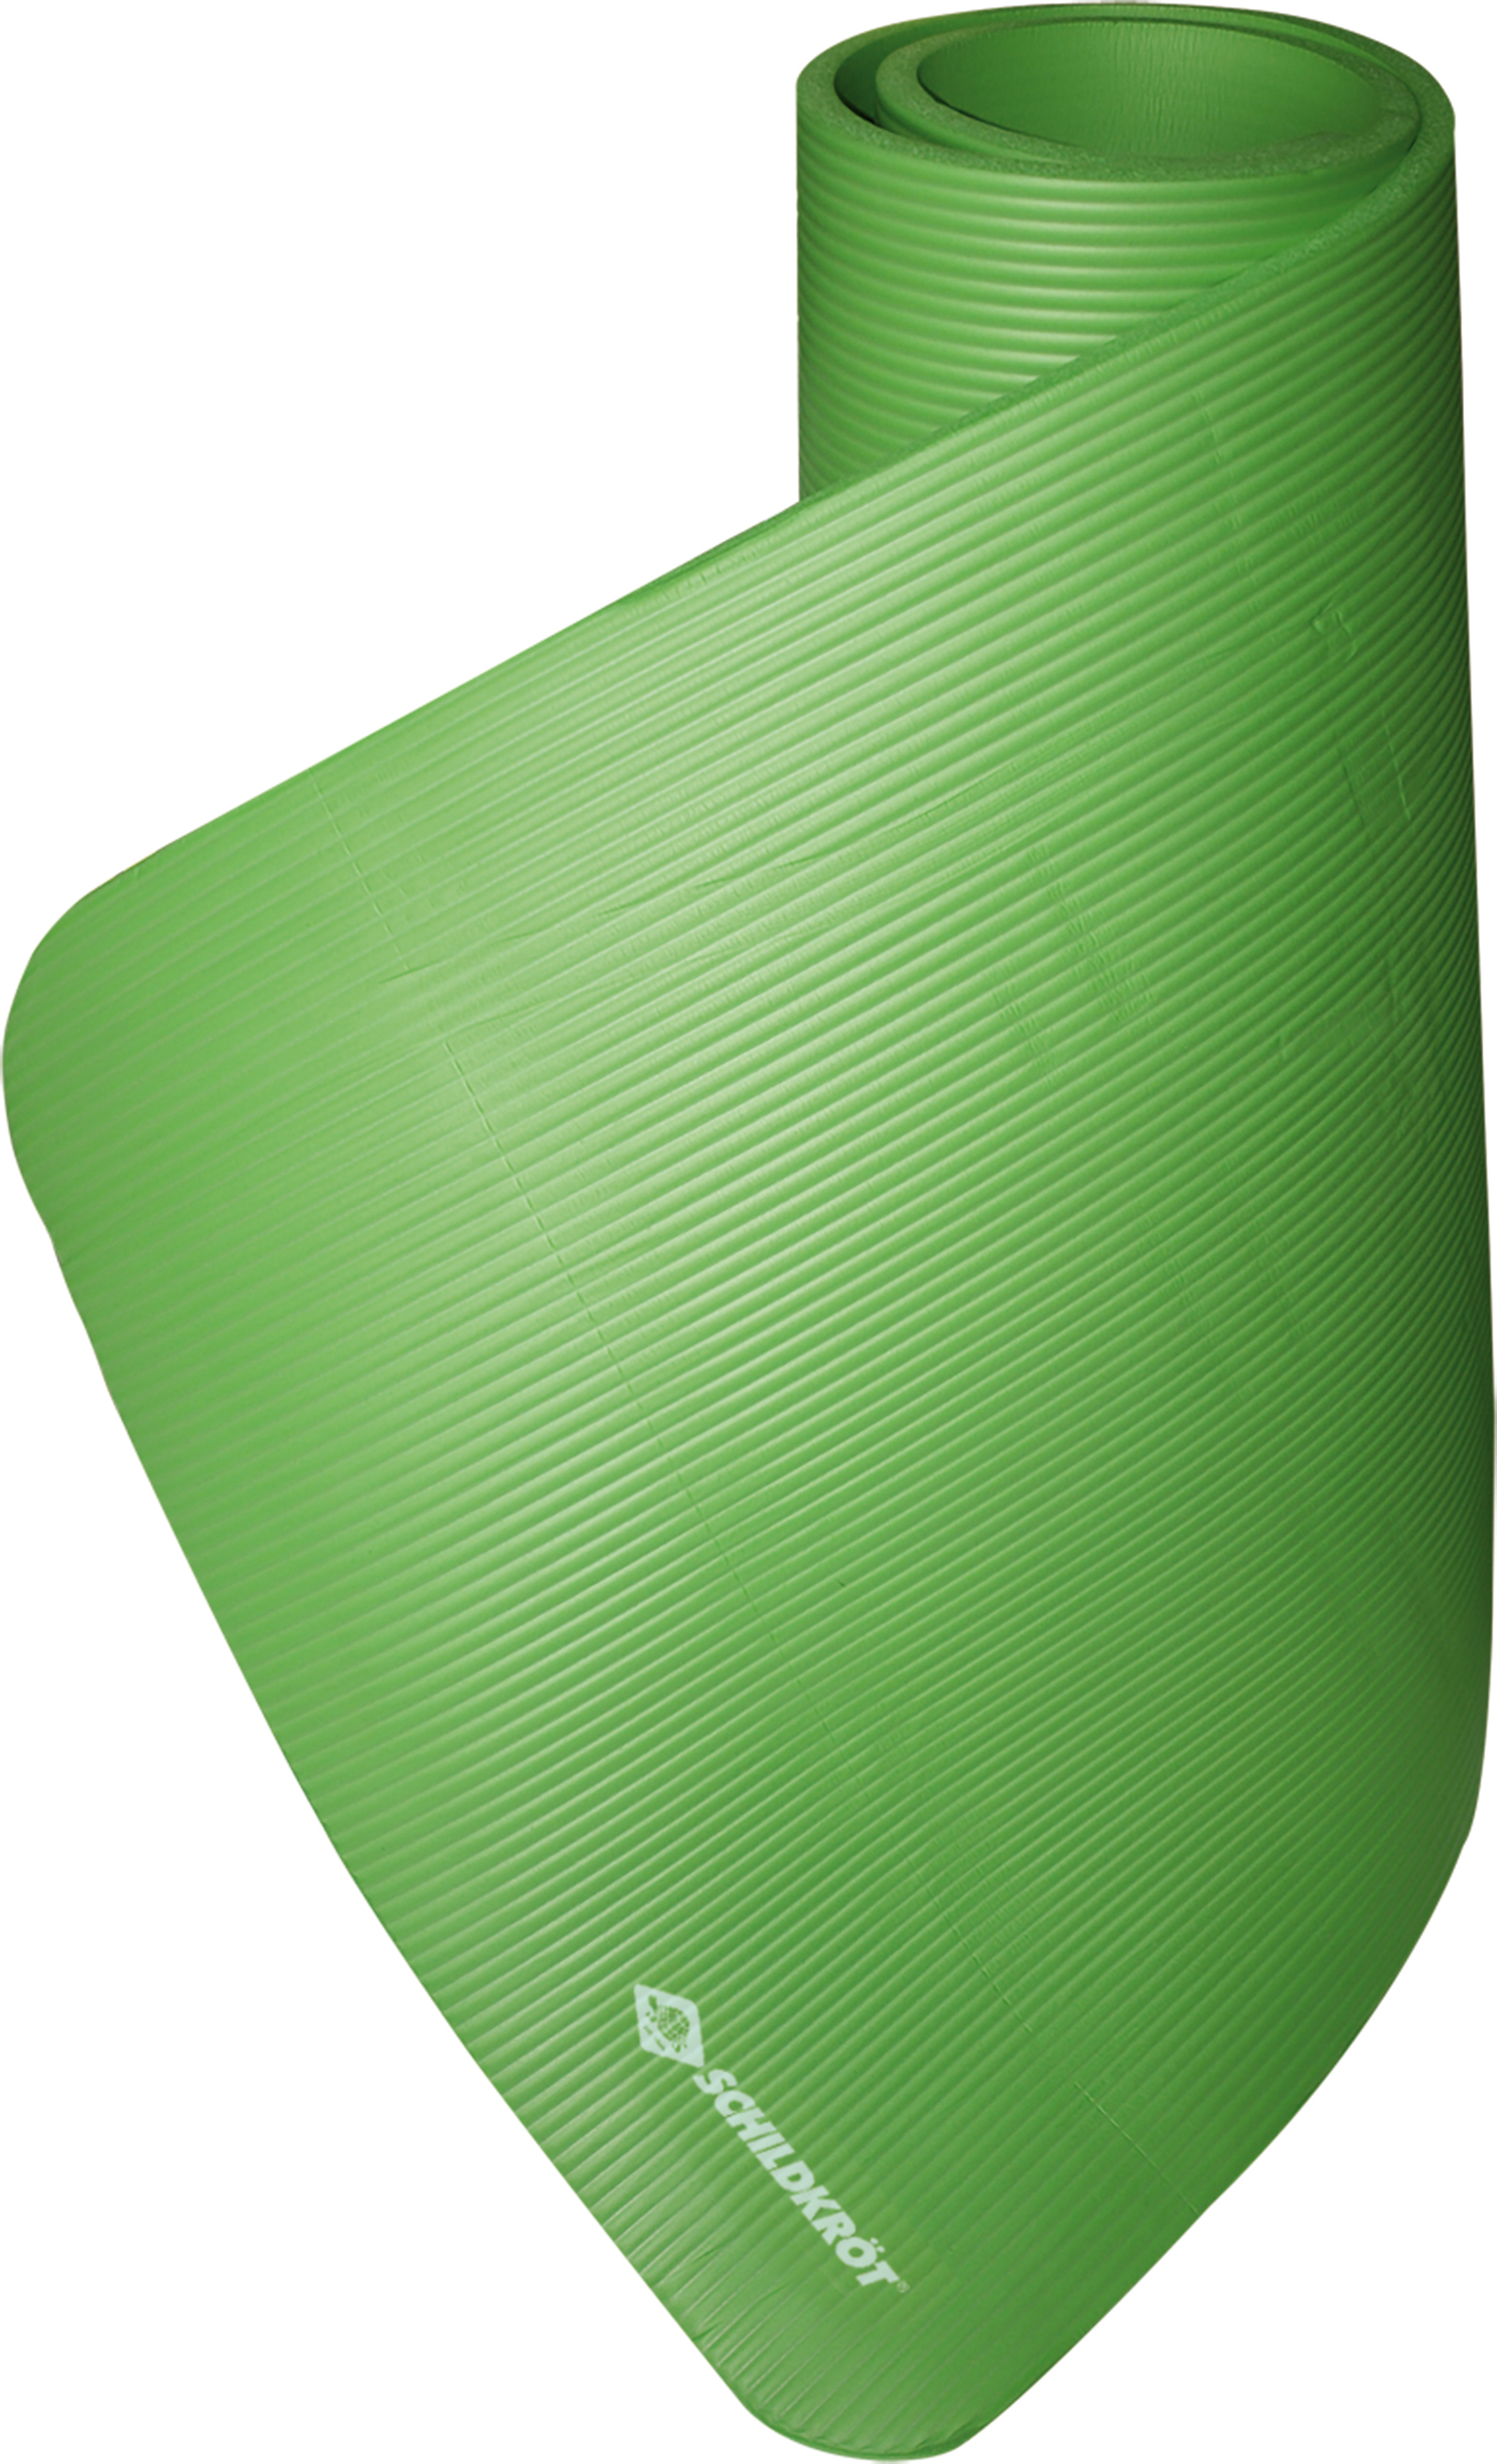 carrying Wolf | 000 FITNESSMATTE, strap, with Intersport - SK Fitness (green),